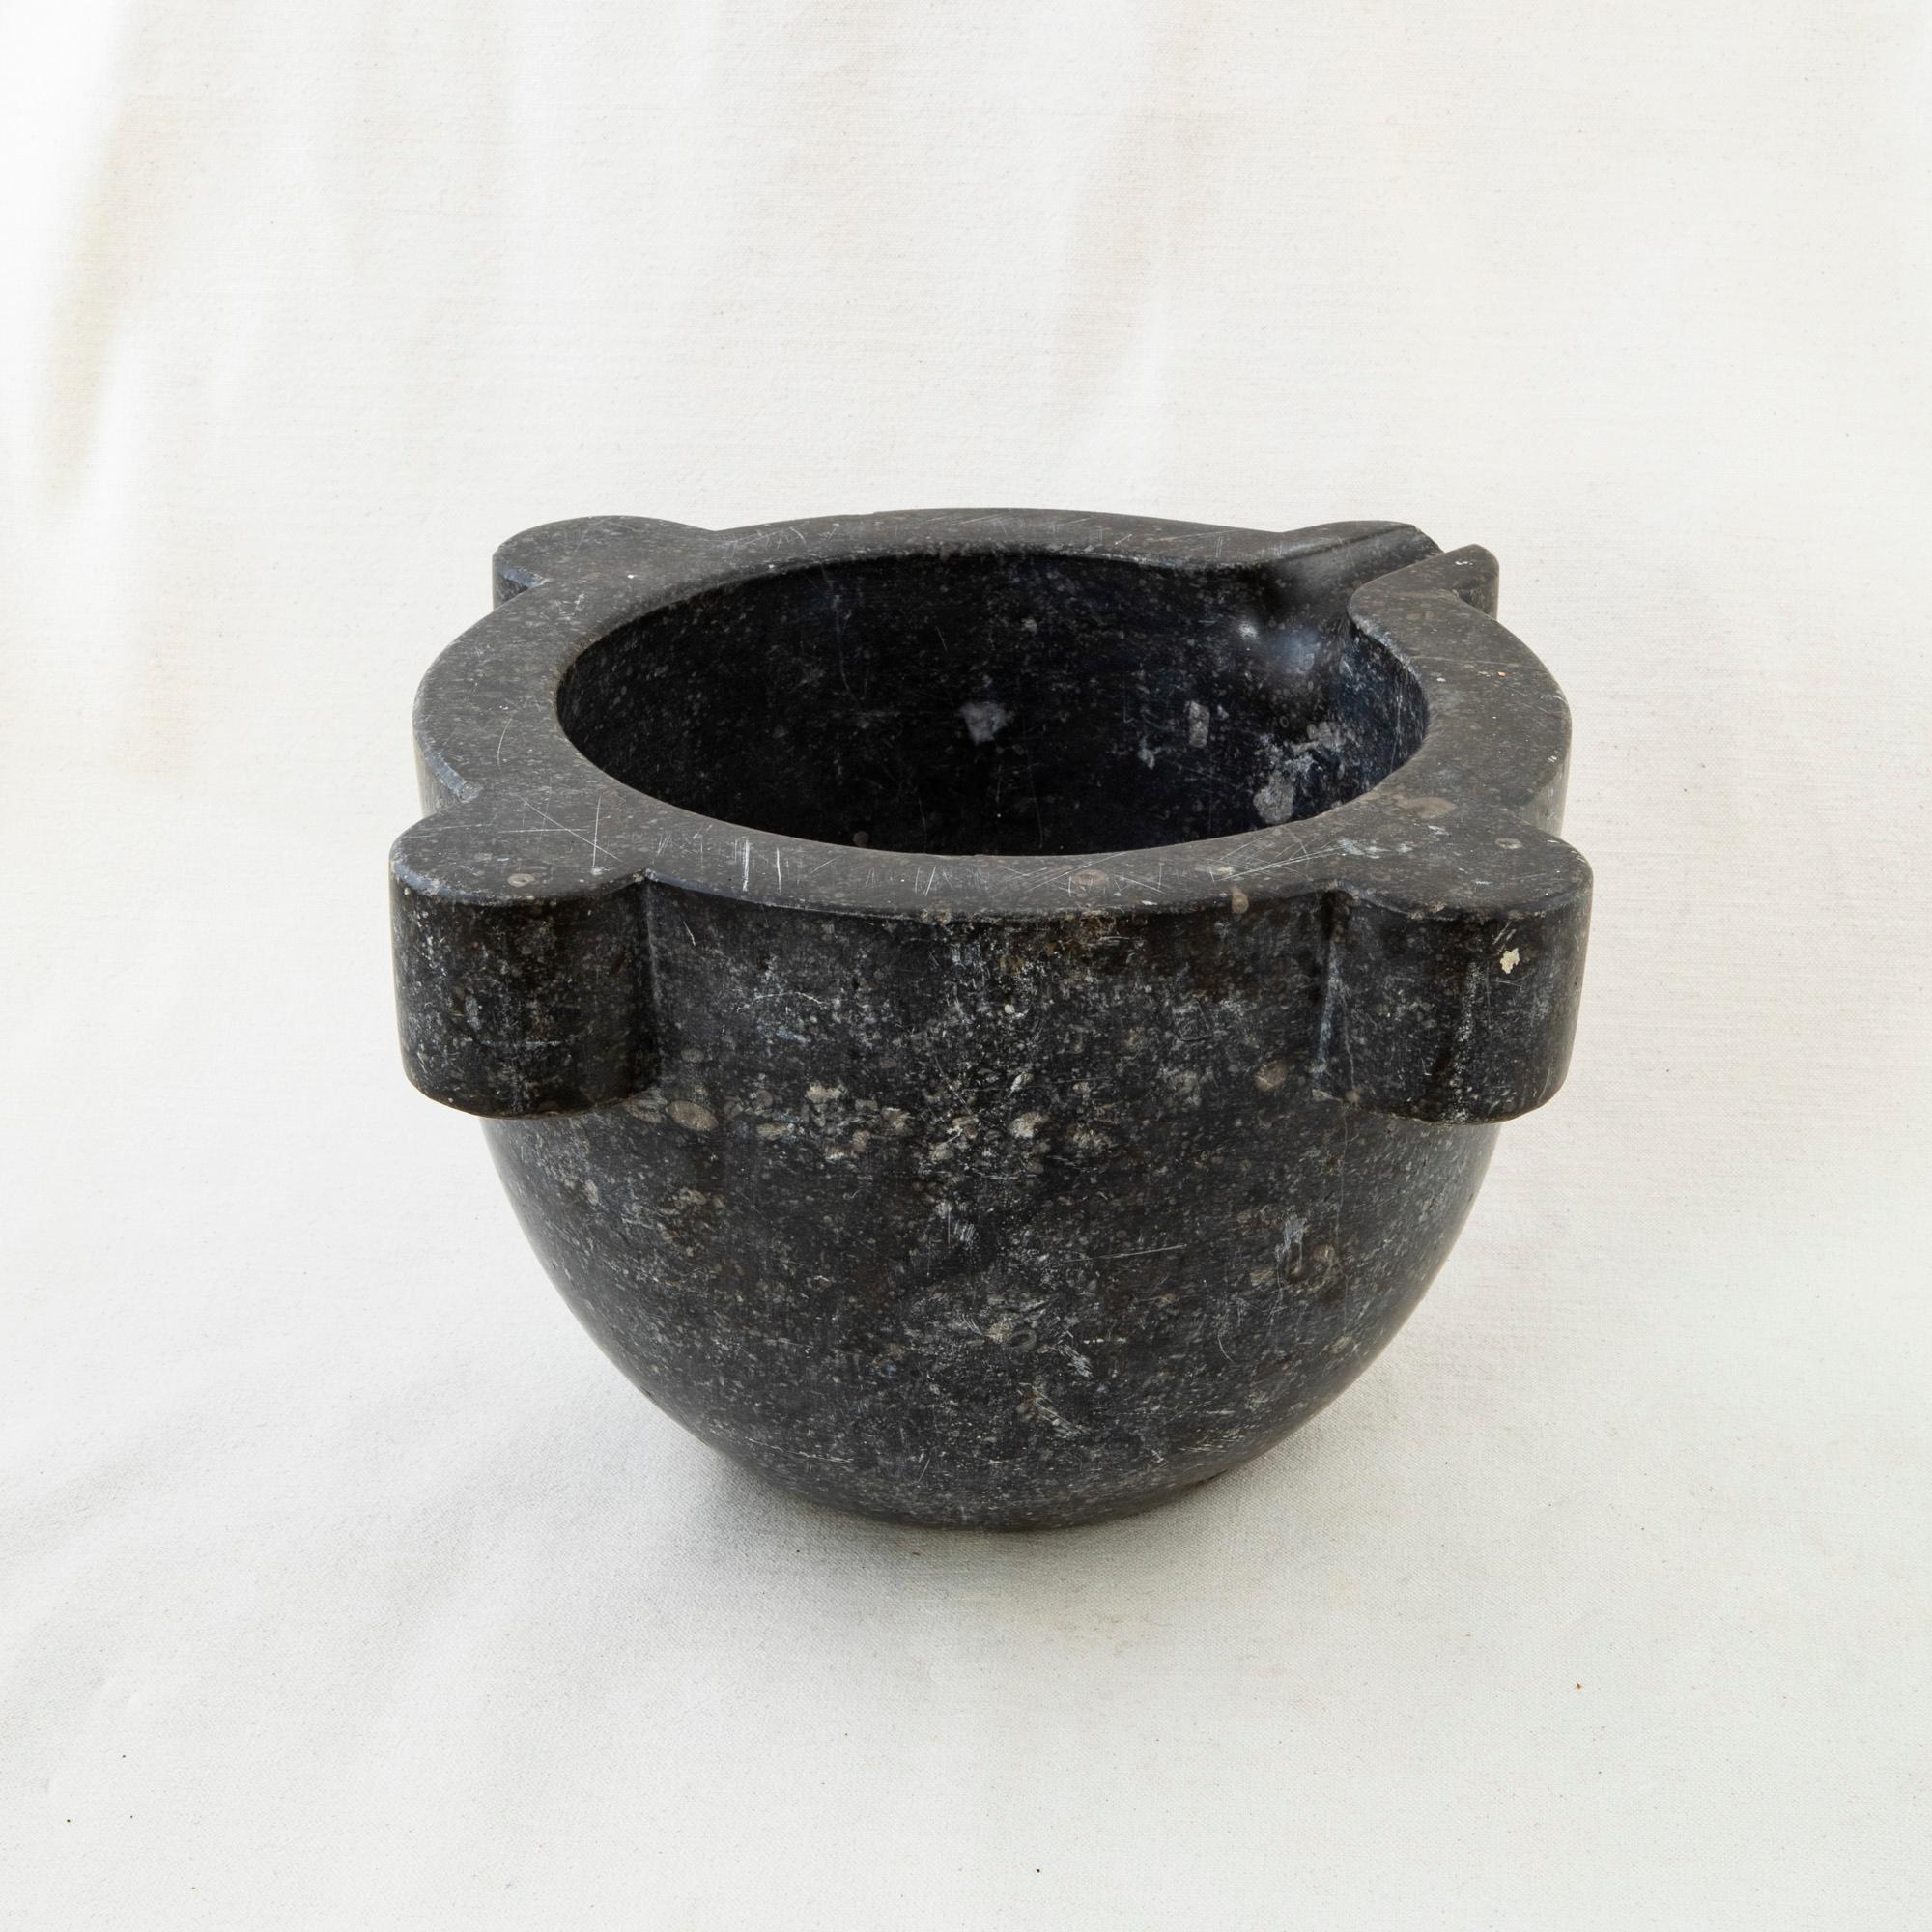 This late 19th century marble mortar is made from a single block of black marble. Large in size, this piece was once used with its accompanying pestle by a pharmacist to grind herbs for medicinal purposes, it can now serve as a planter, bowl, or